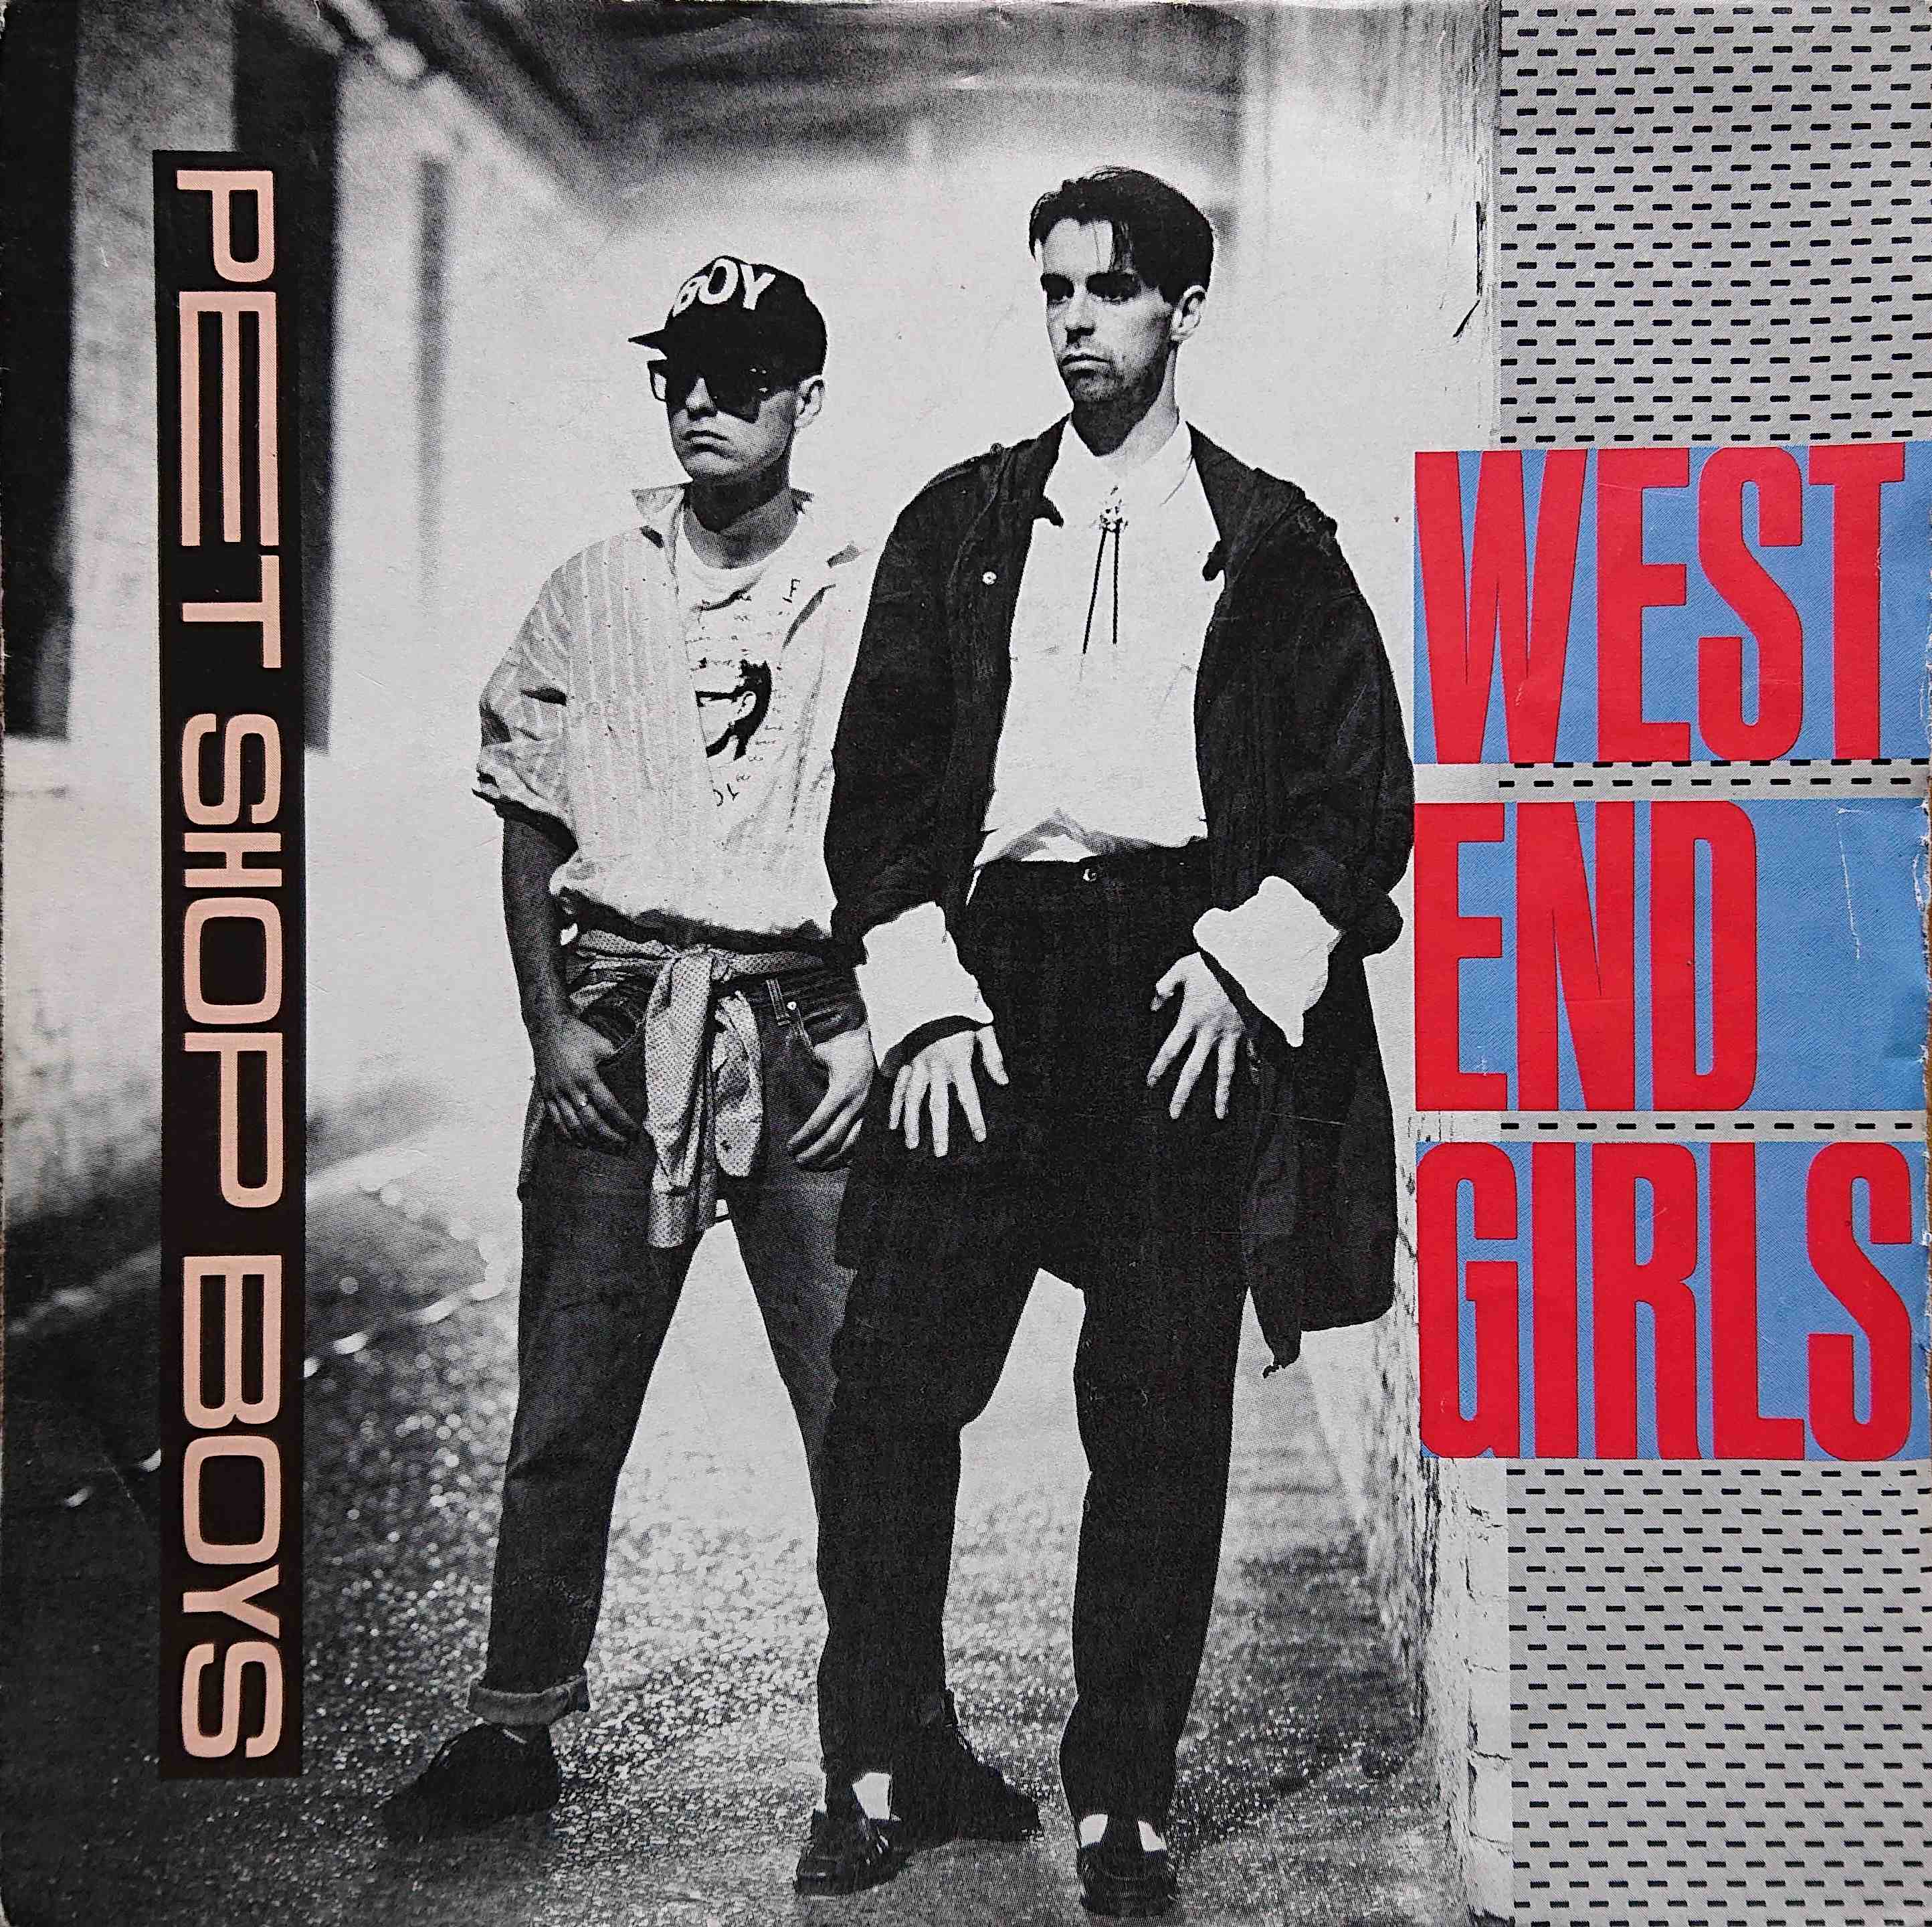 Picture of West end girls by artist The Pet shop boys 